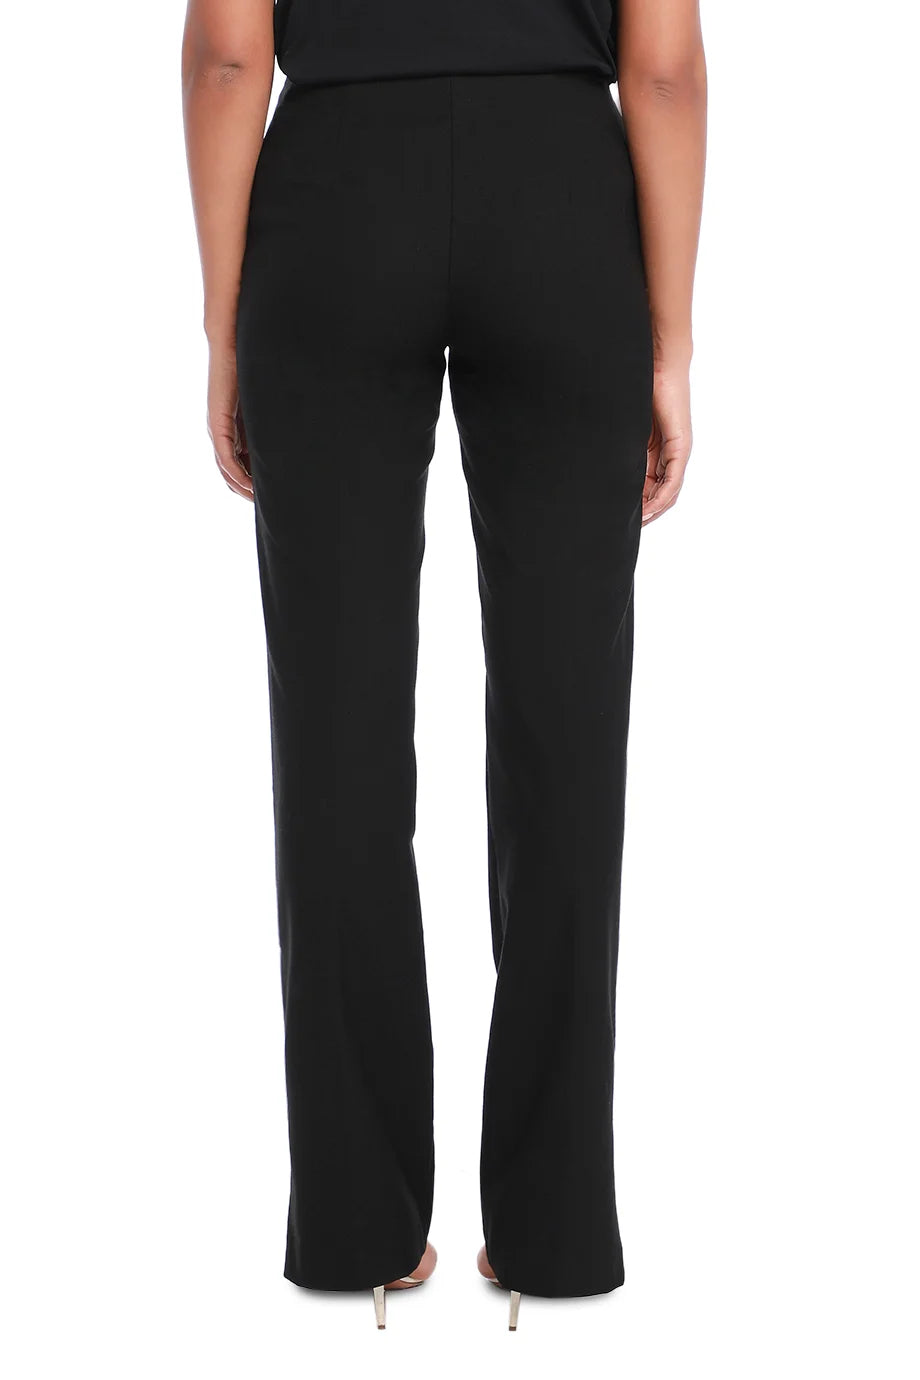 Cassius Studded Straight Trouser